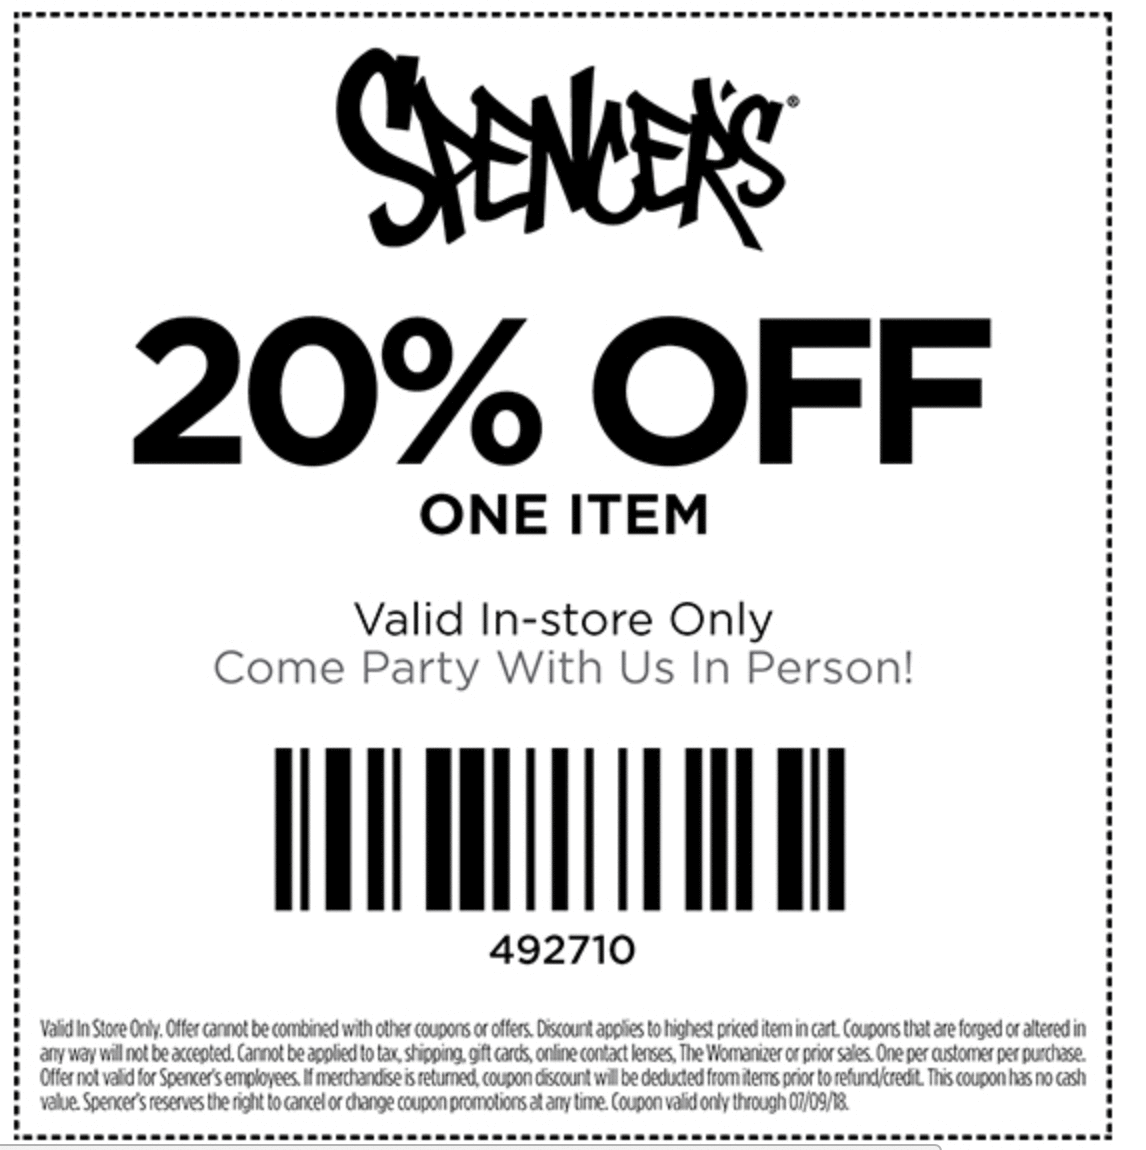 Spencers Coupons, Promo Codes, Deals 2018 CouponShy